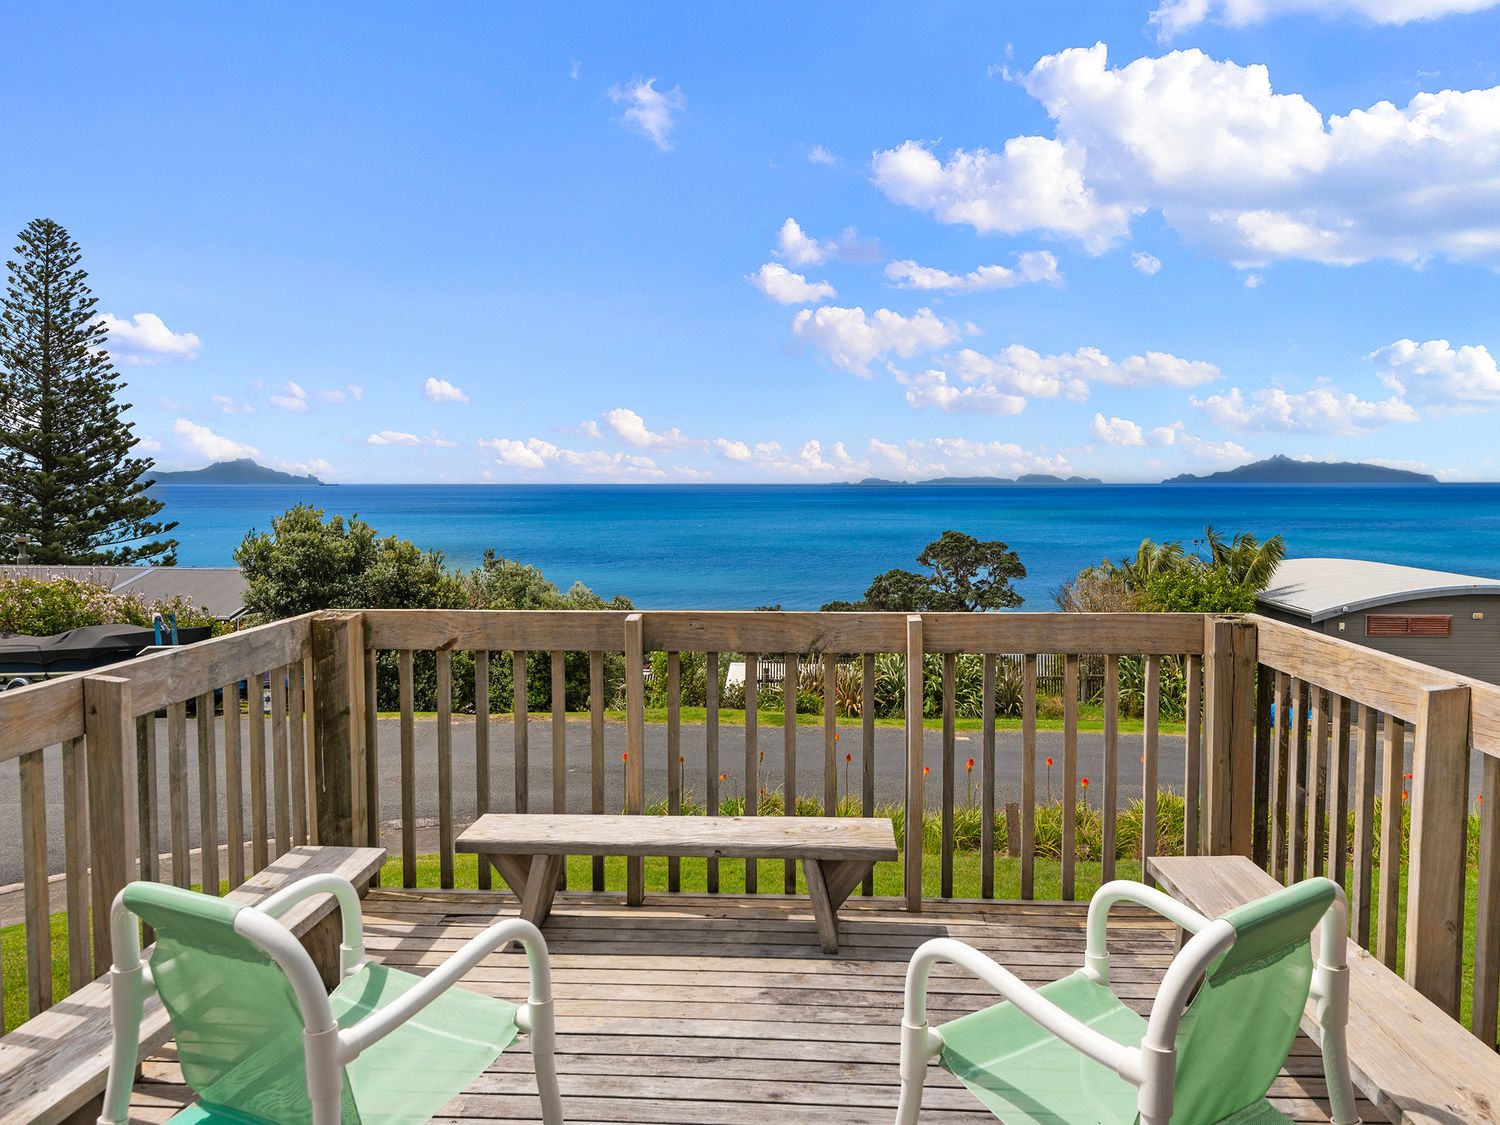 Bay View Bach - Langs Beach Holiday Home -  - 1146042 - photo 1